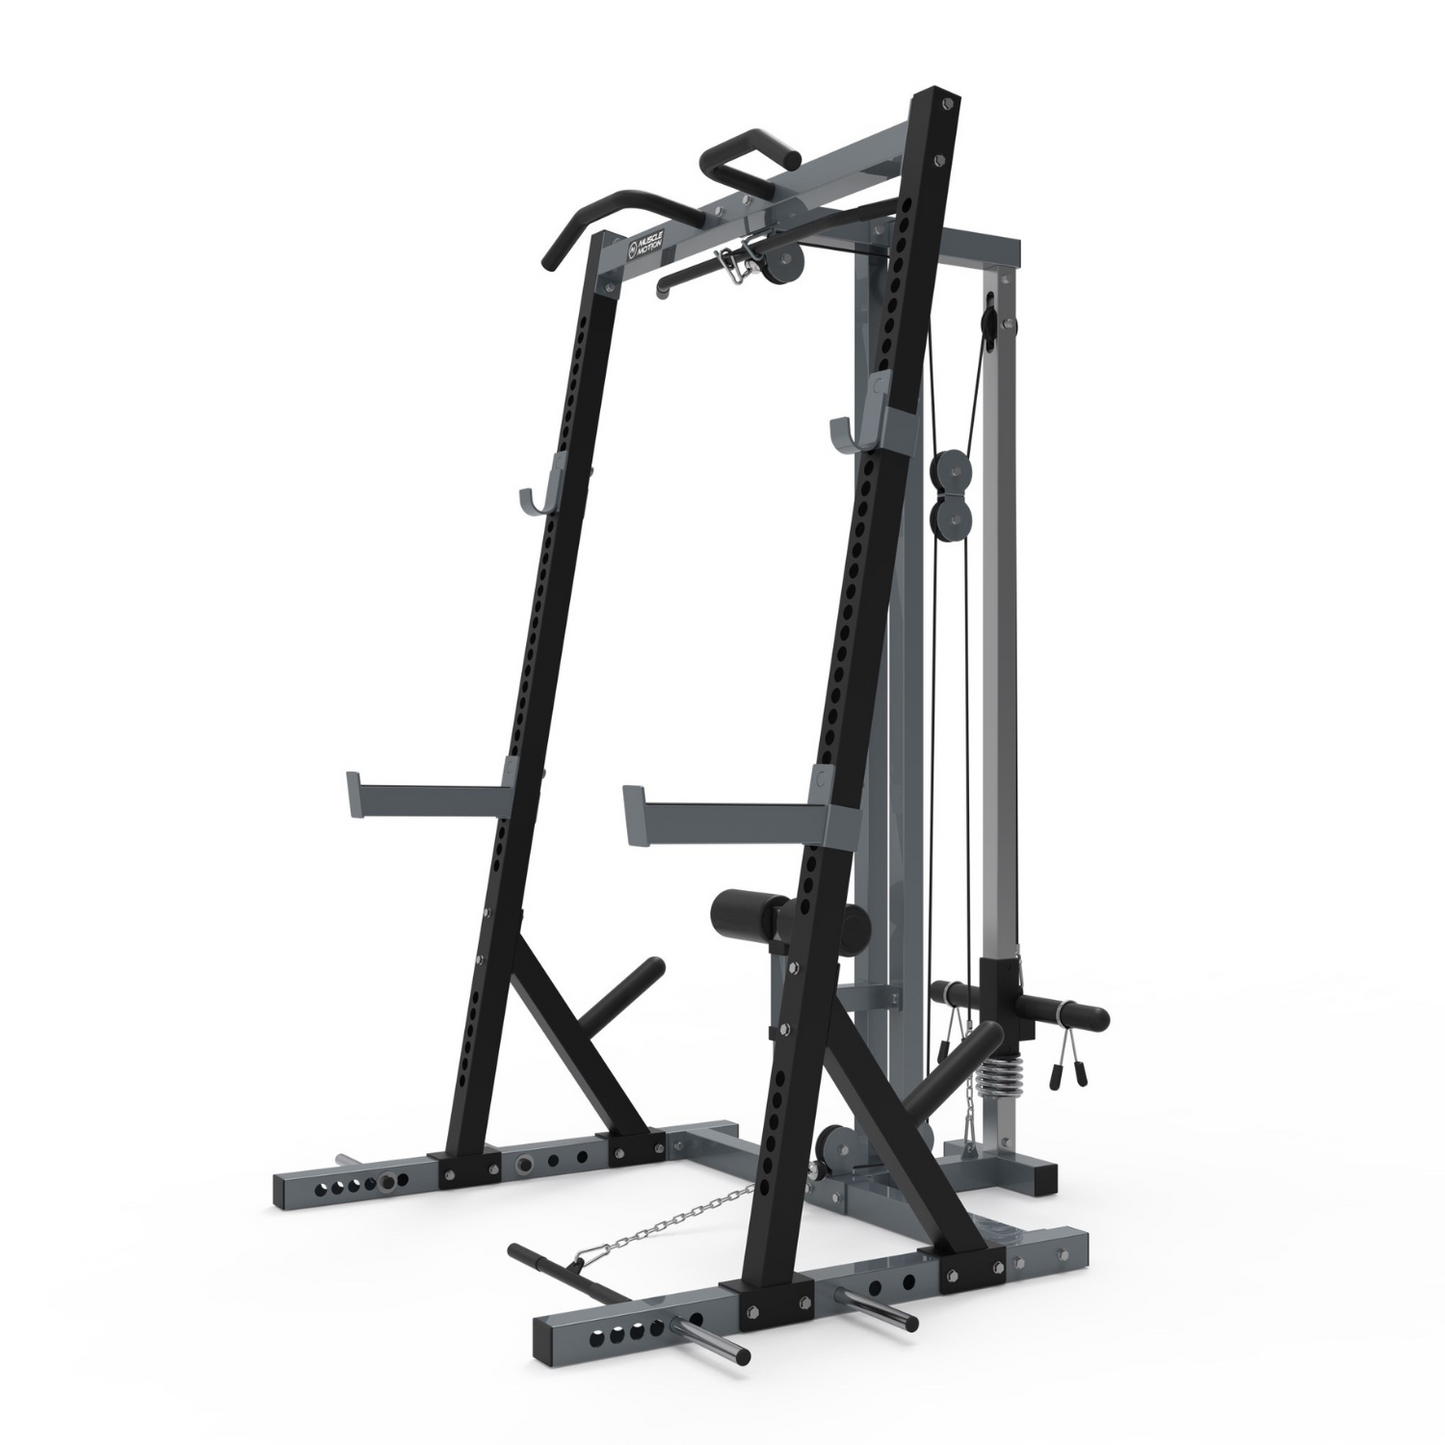 Muscle Motion Package Deal - HR1001 Half Rack & High Low Pulley, Adjustable Bench, Olympic Bar and 105kg Olympic Weights